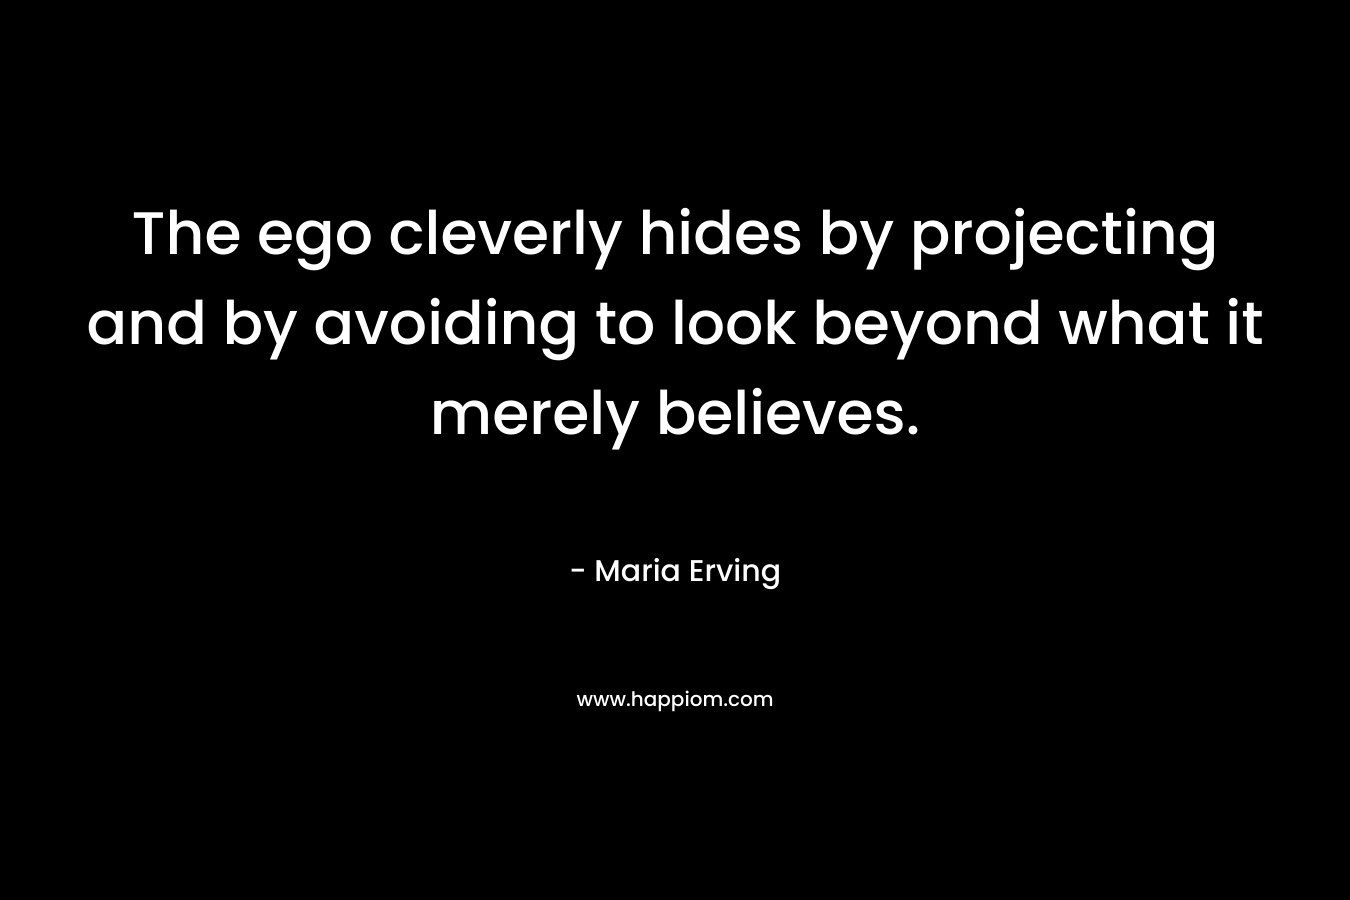 The ego cleverly hides by projecting and by avoiding to look beyond what it merely believes. – Maria Erving